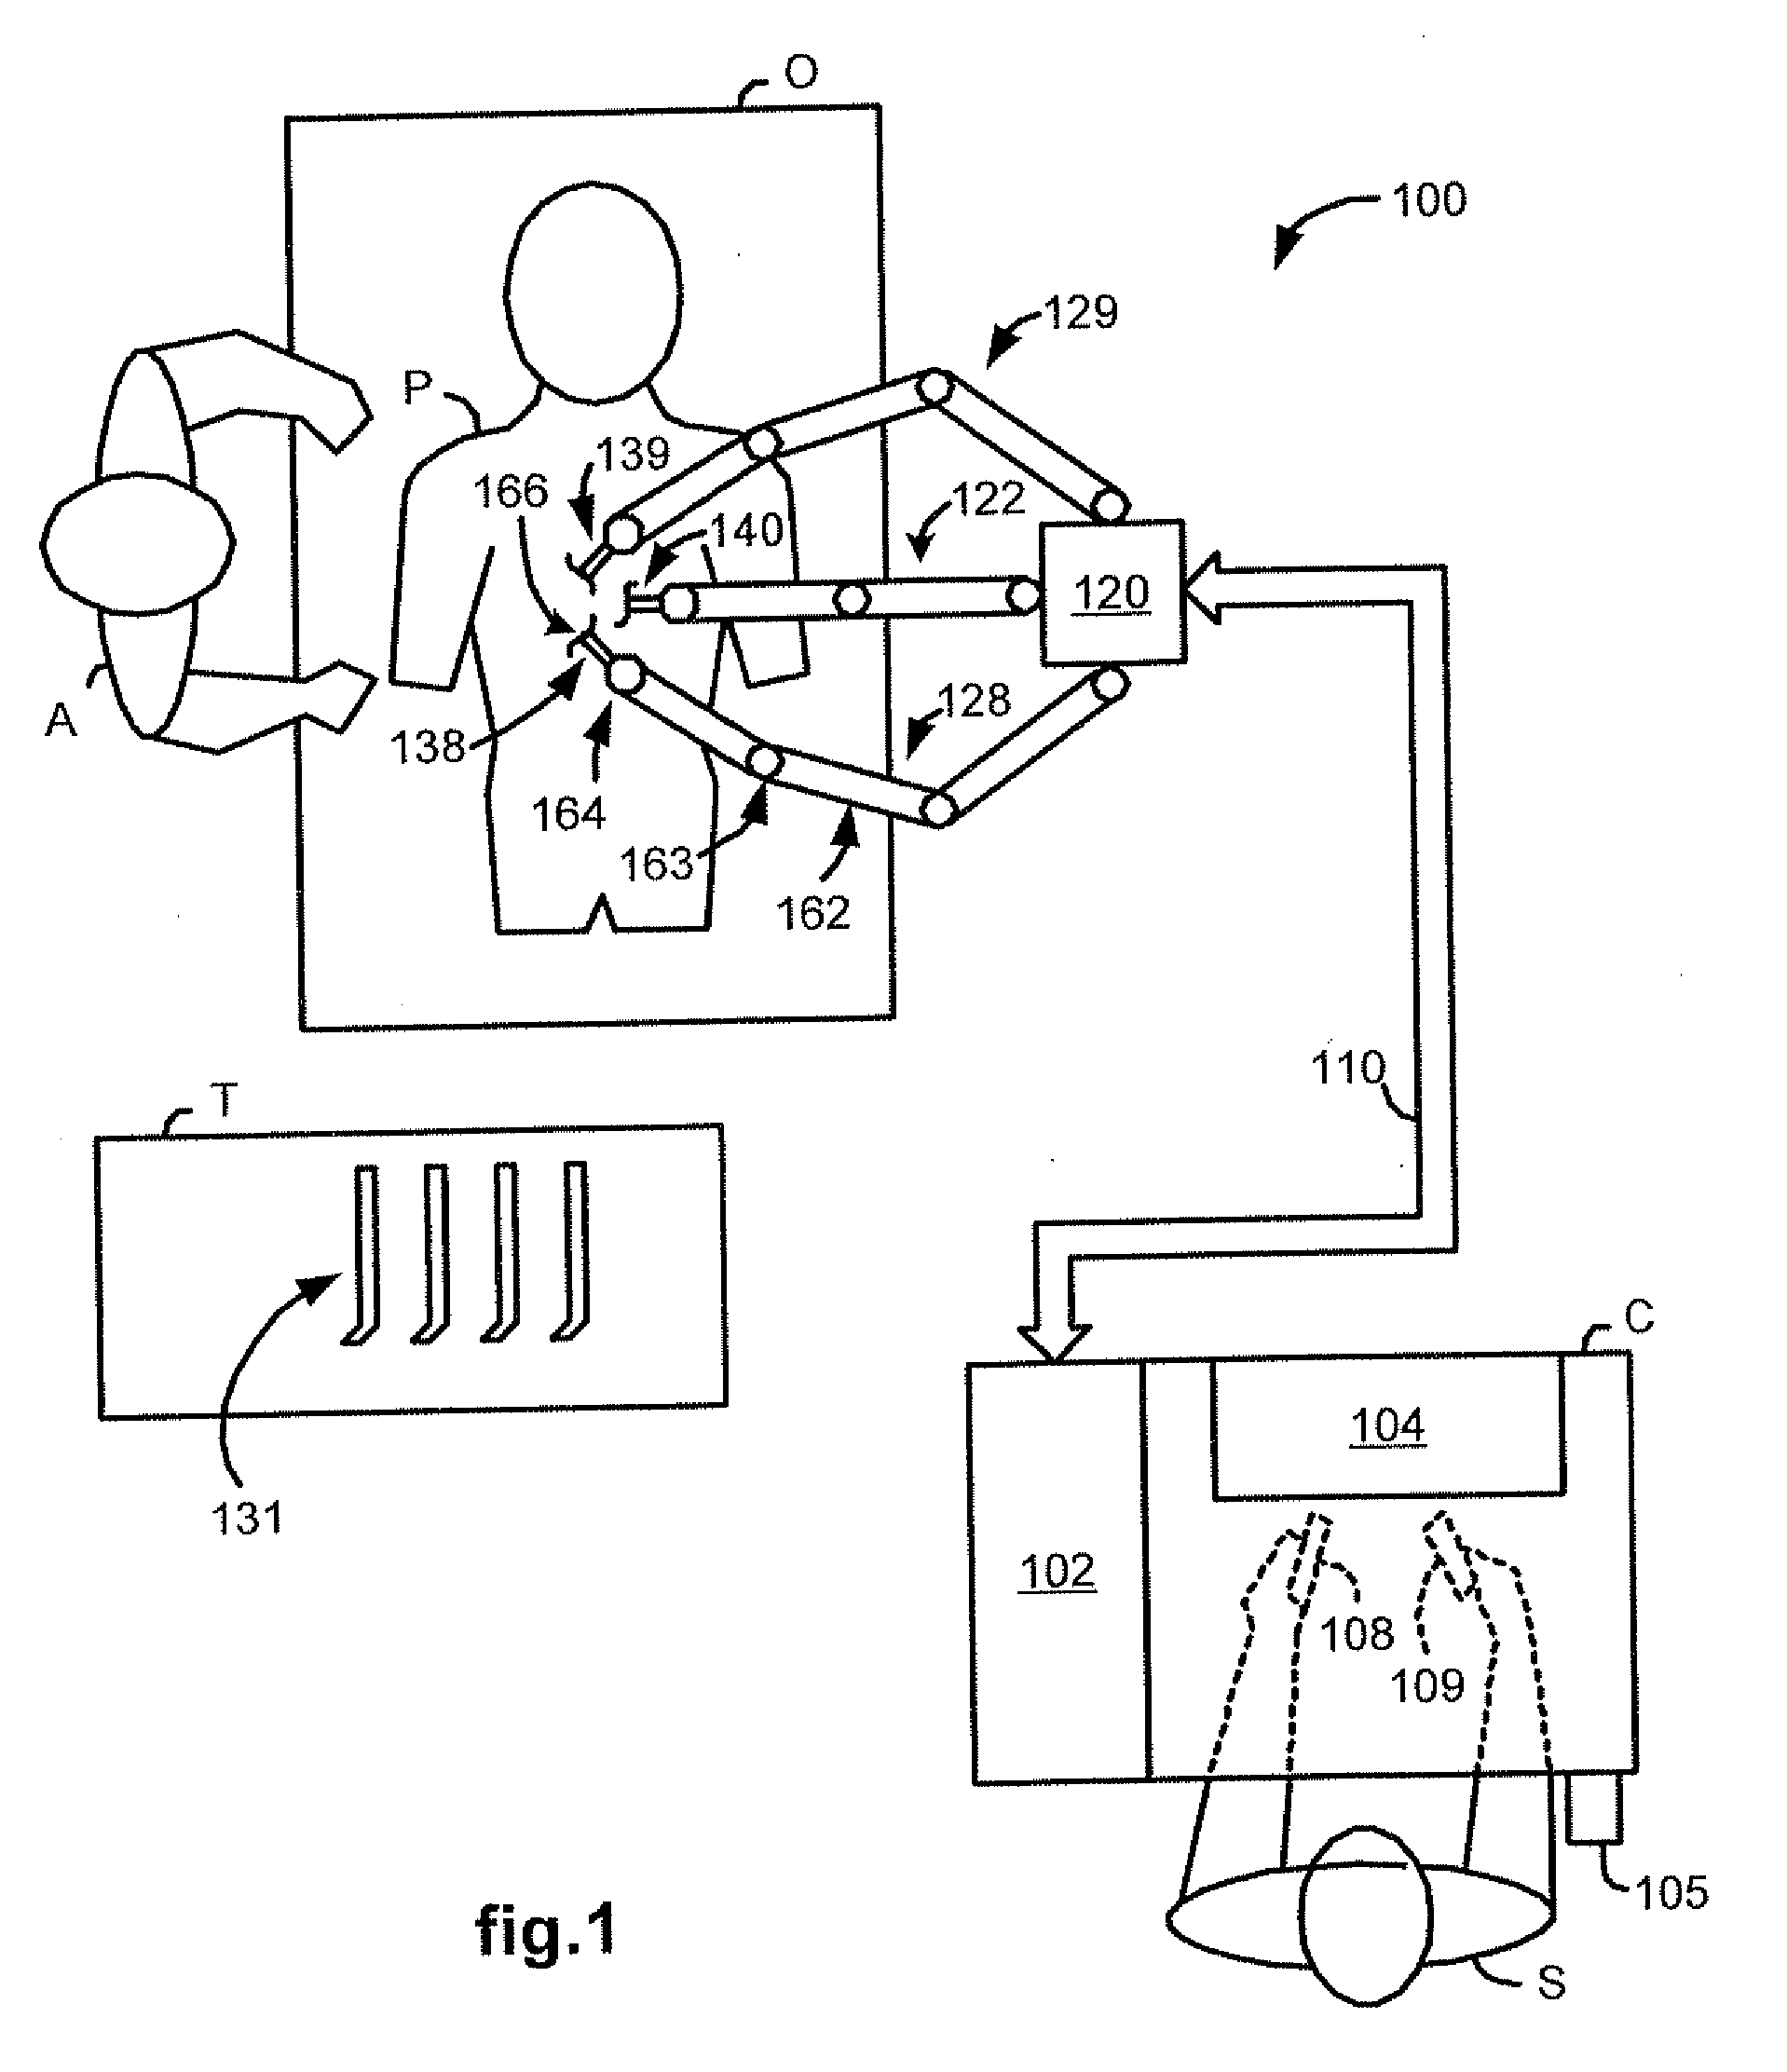 Method for handling an operator command exceeding a medical device state limitation in a medical robotic system